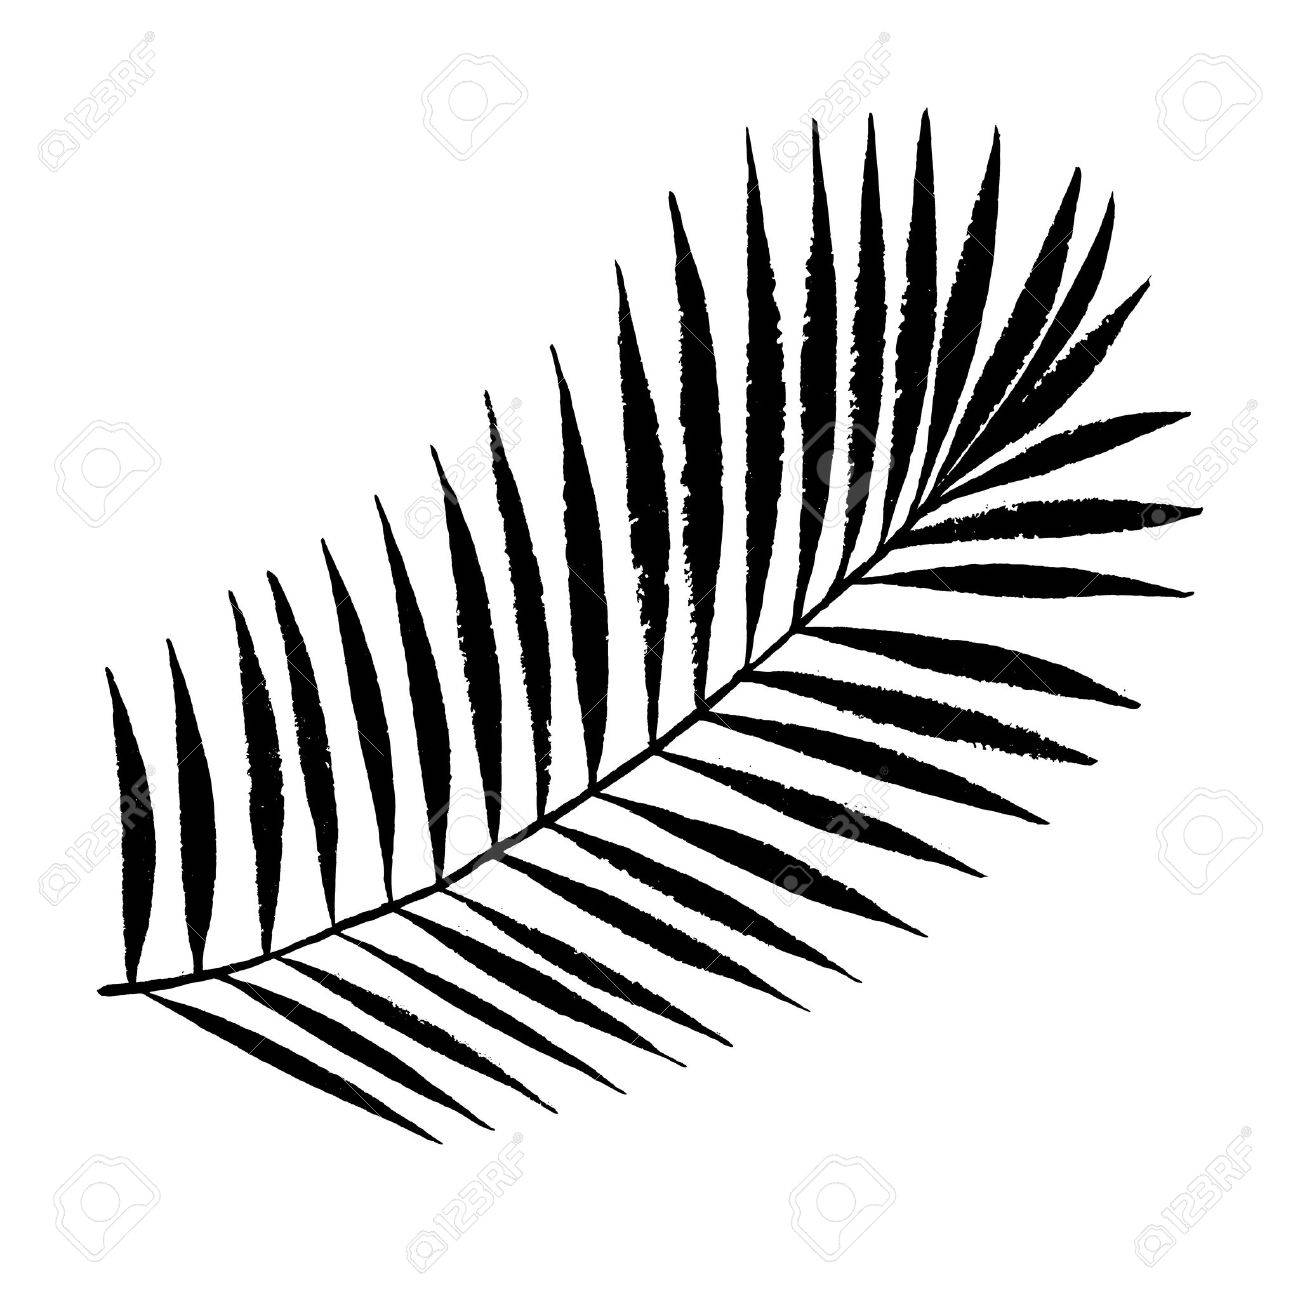 Palm leaf clipart black and white